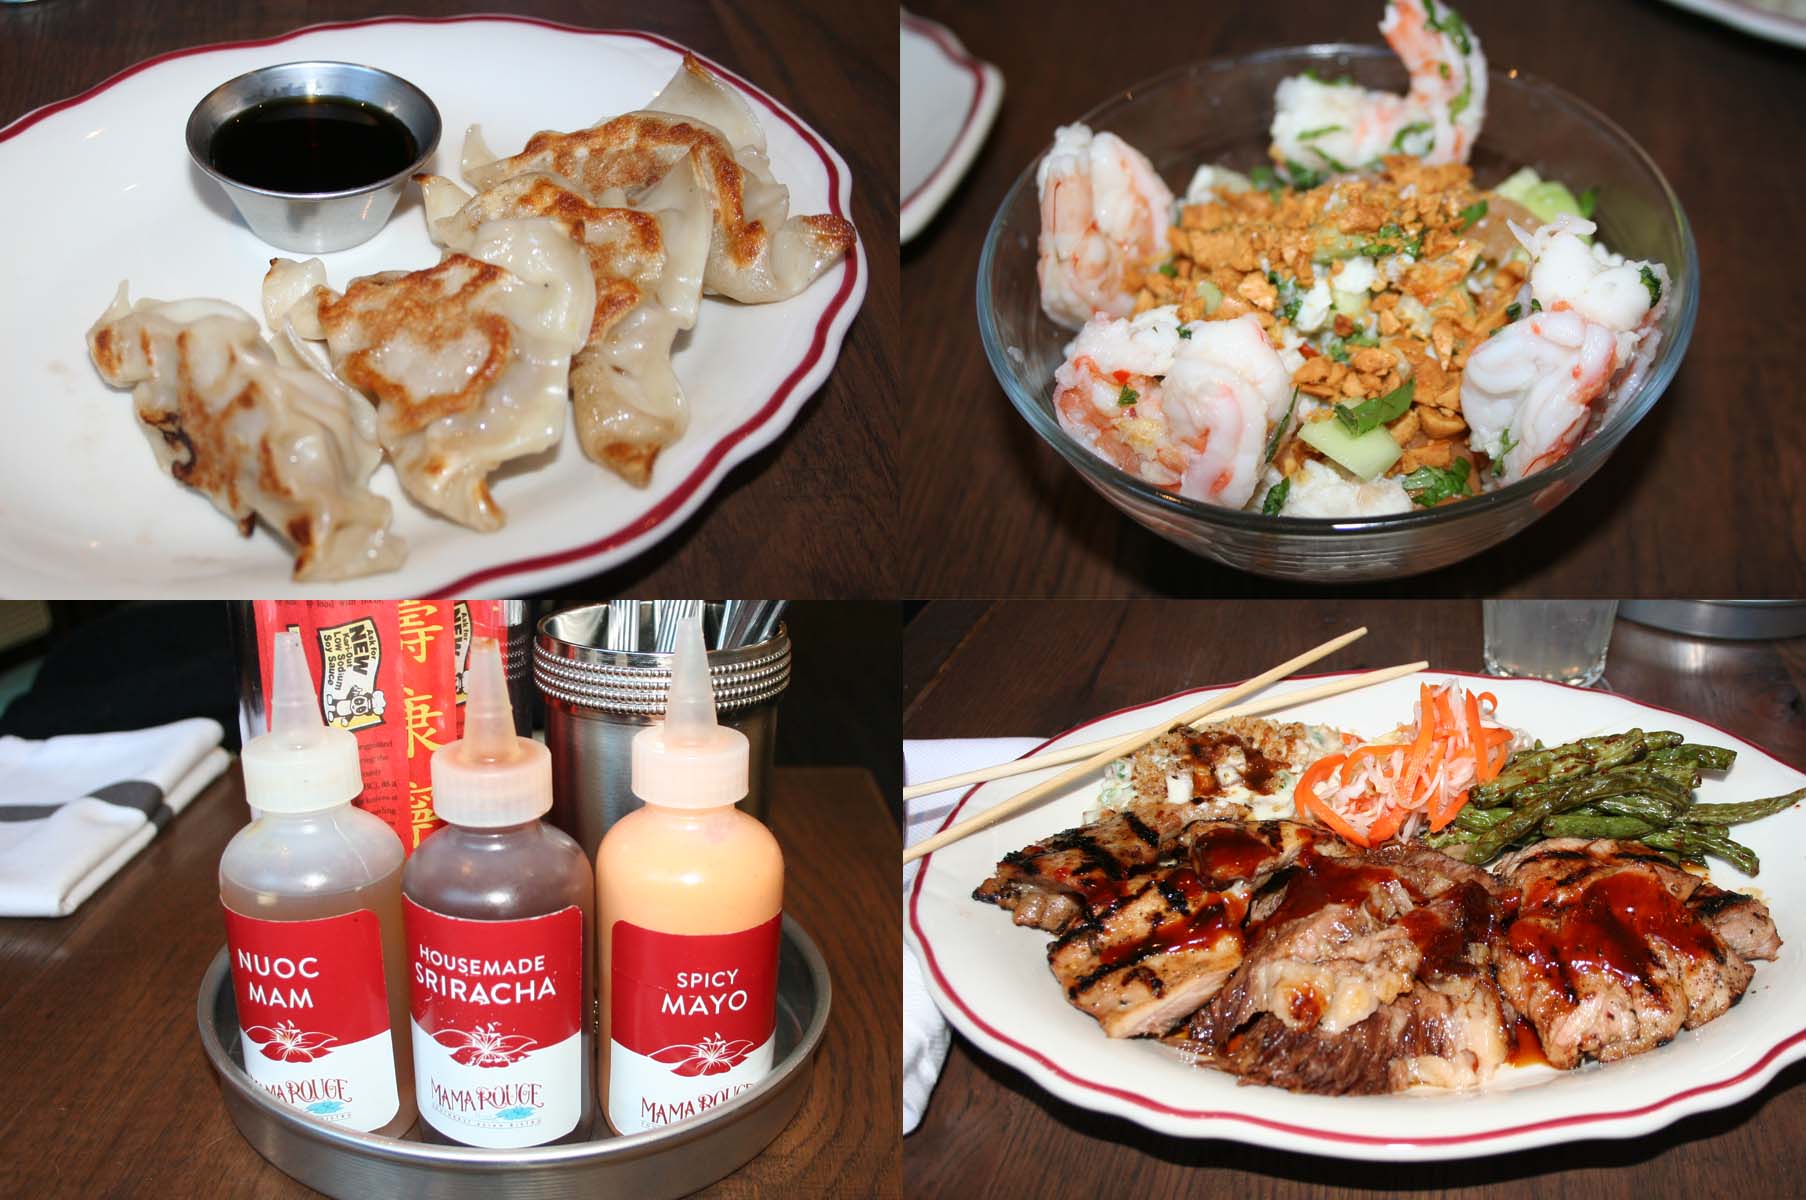 Mama Rouge's menu includes mama's pork dumplings (clockwise from top left), crab and shrimp salad, mixed grill BBQ and nuoc mam (fish sauce) house-made Sriracha and and spicy mayo (Sriracha and mayonnaise). (Photos: Mark Heckathorn/DC on Heels)